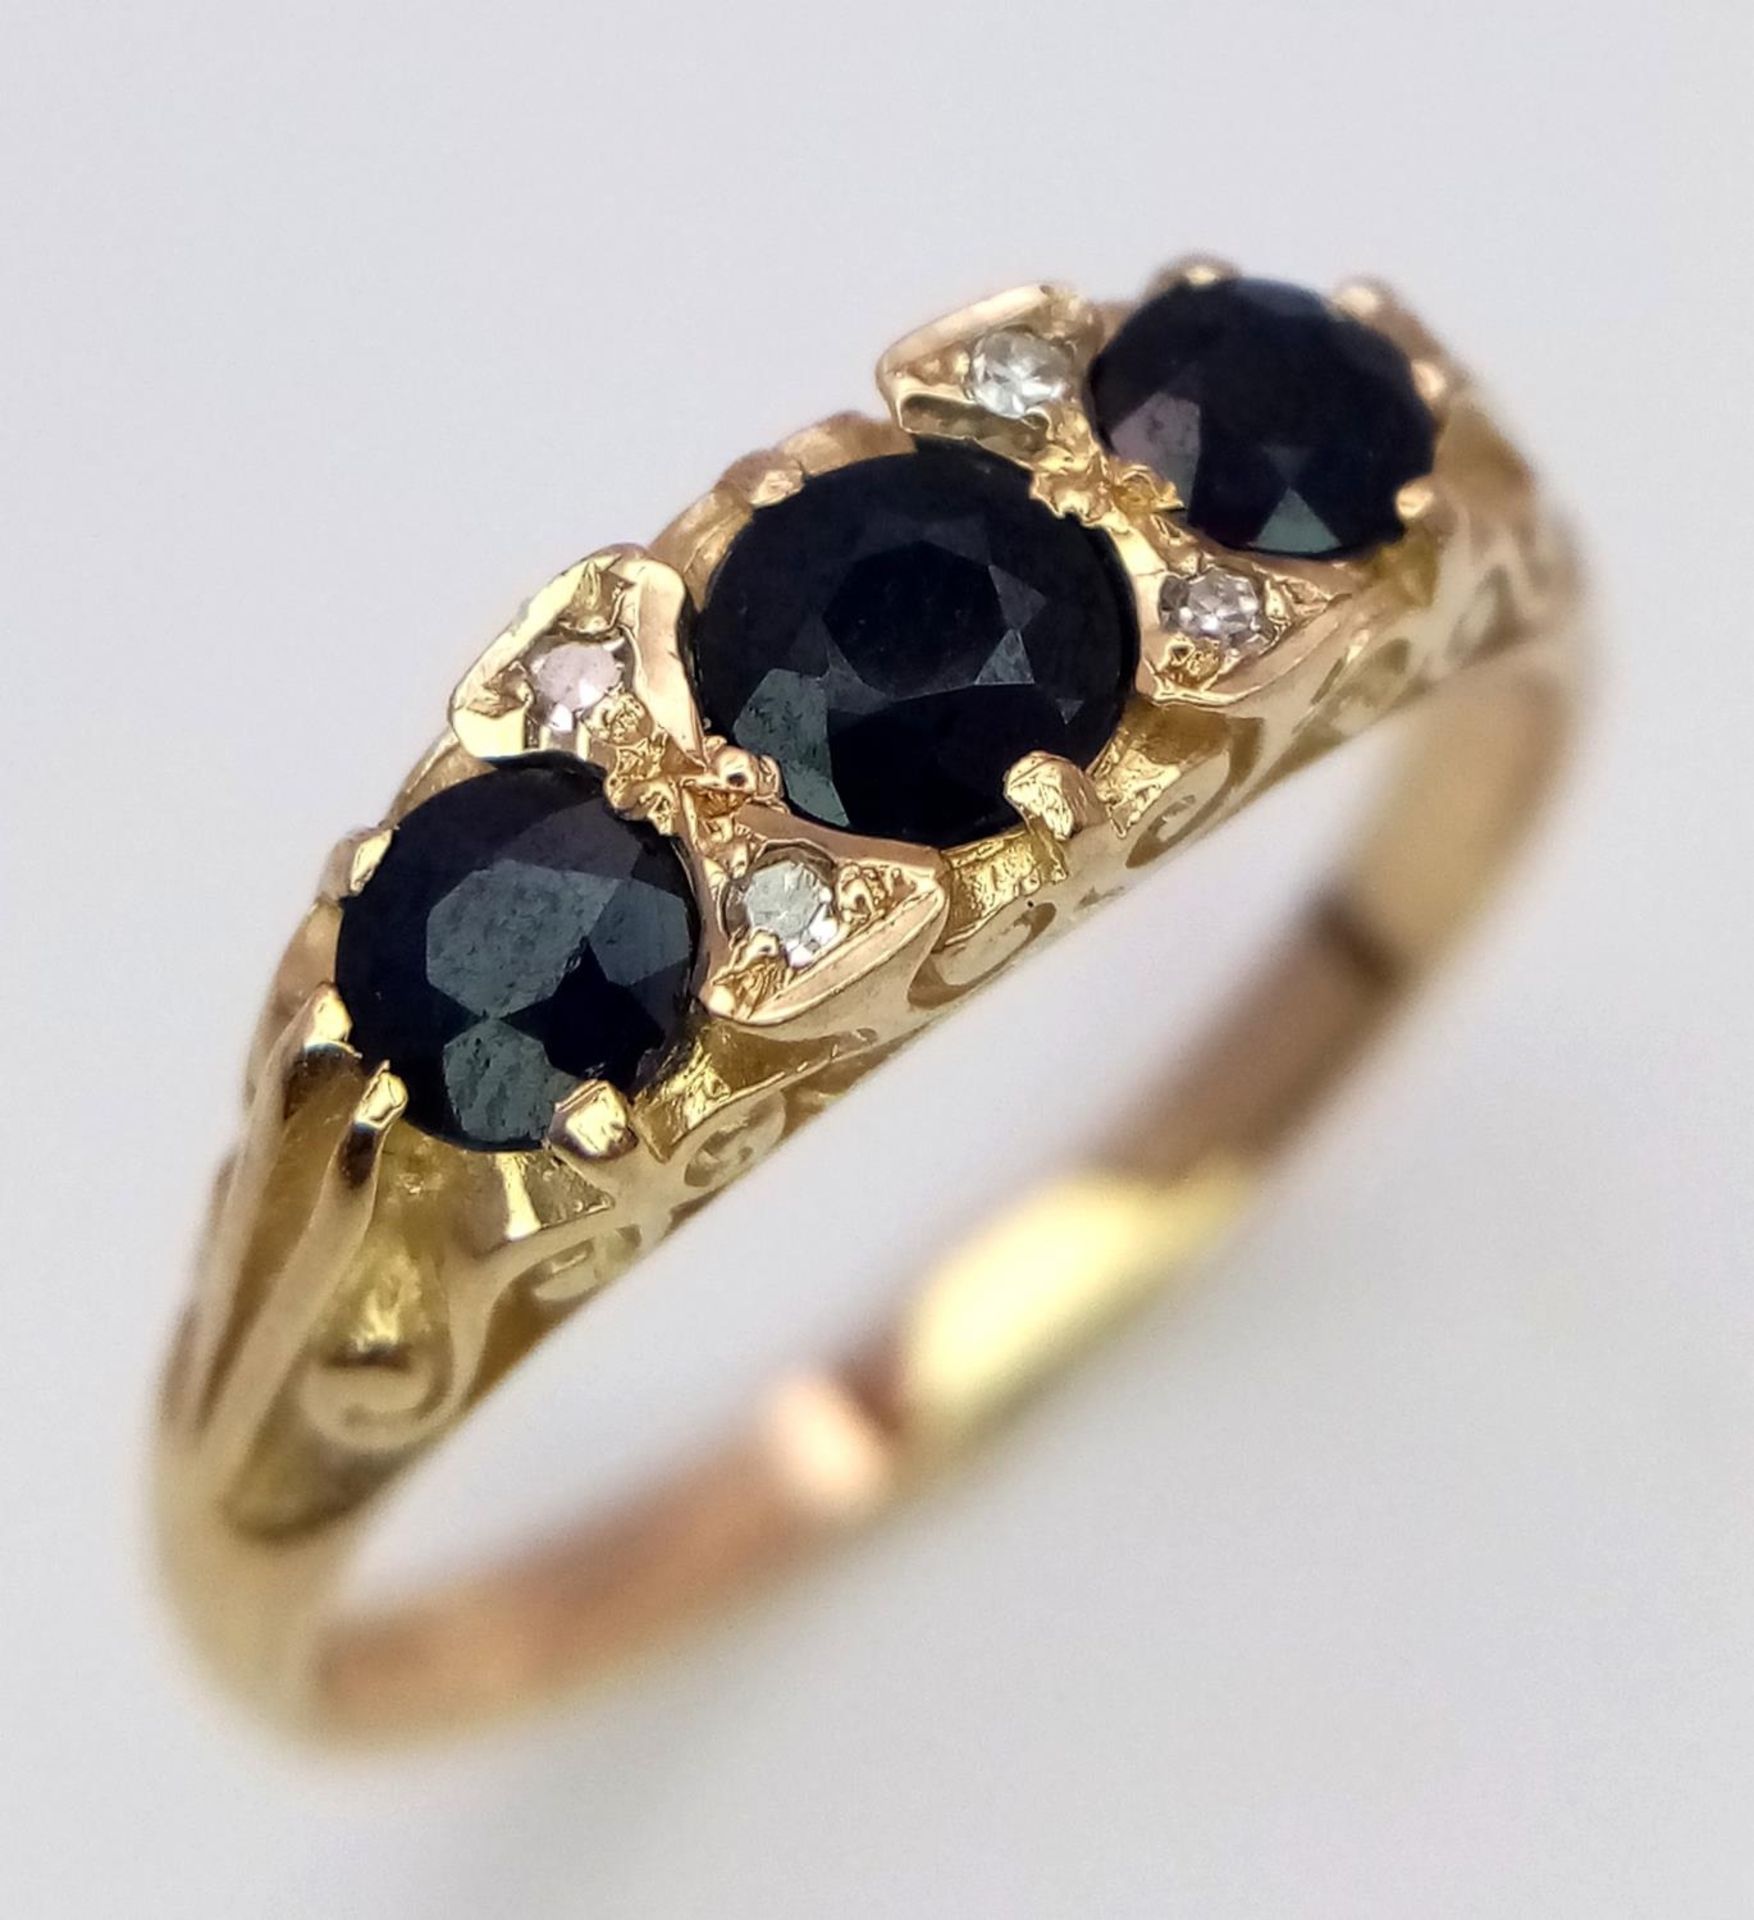 A 9K YELLOW GOLD DIAMOND & SAPPHIRE RING 2.45G 0.50CT SAPPHIRES SIZE O SPAS 9008